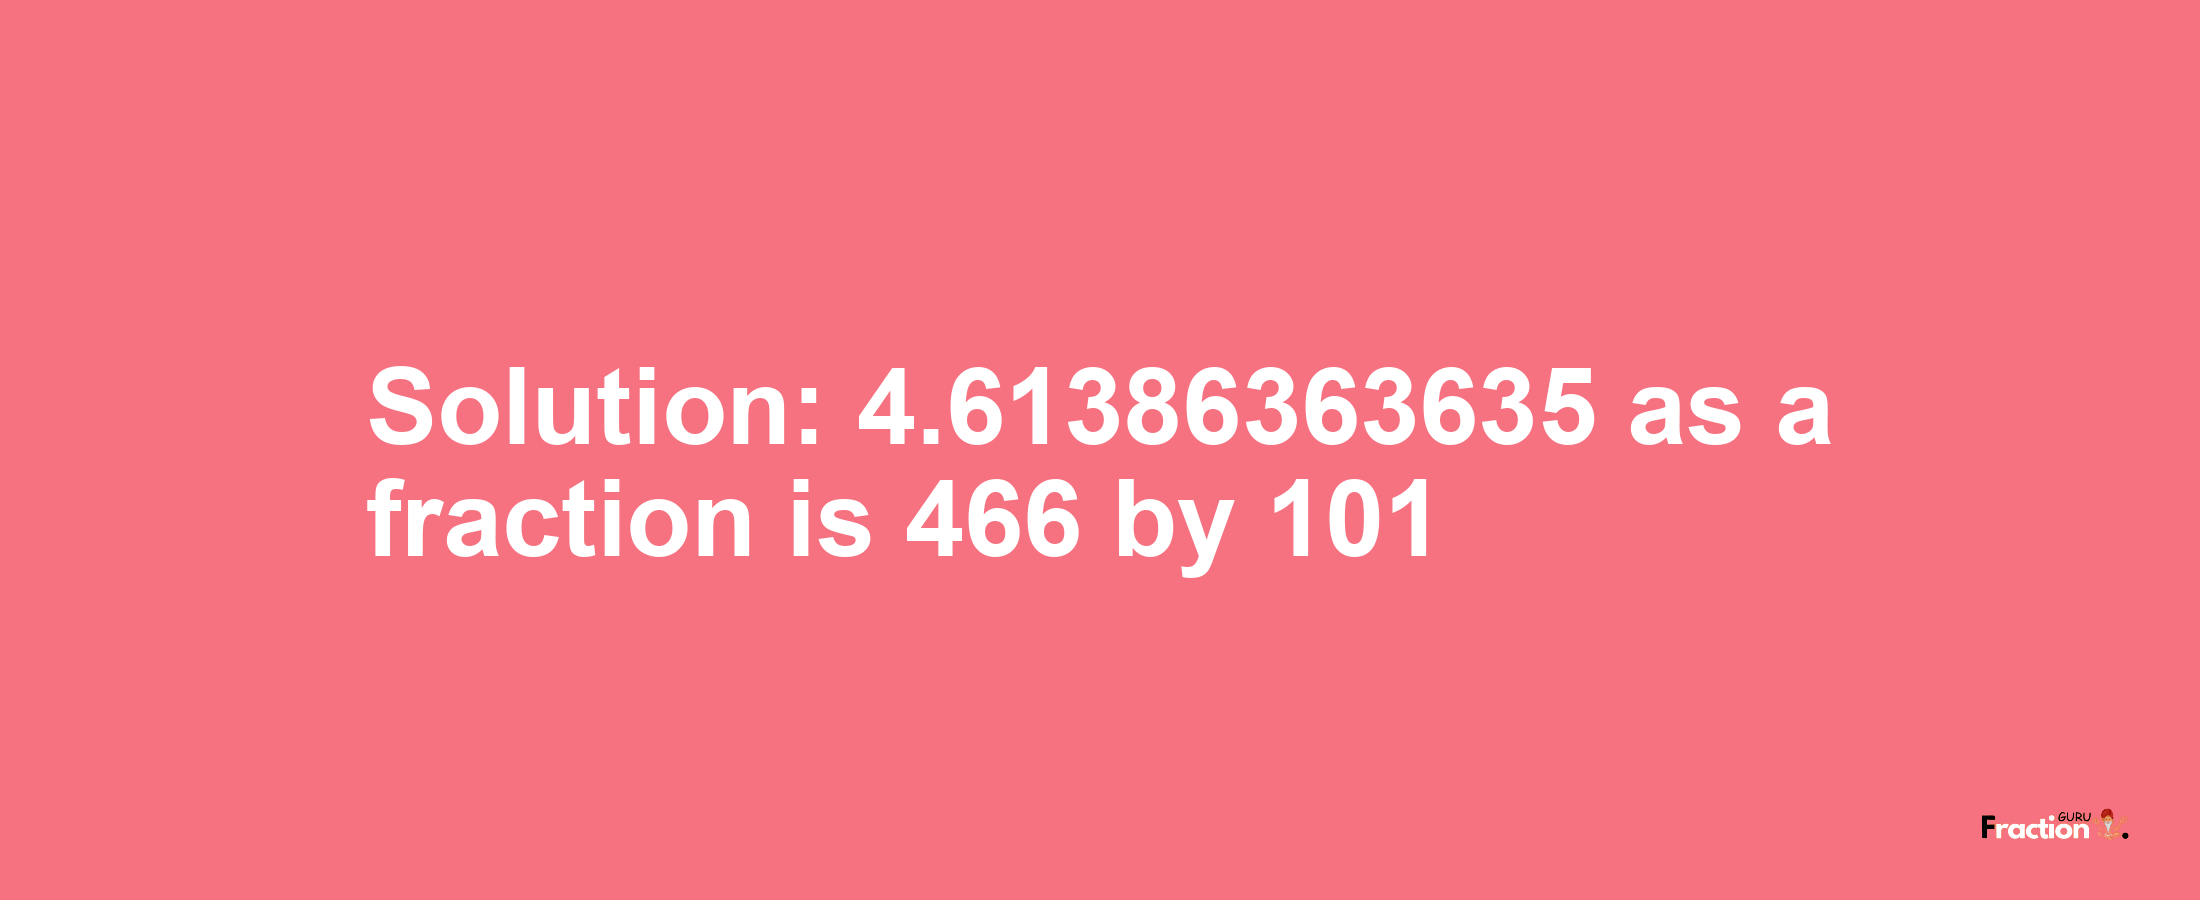 Solution:4.61386363635 as a fraction is 466/101